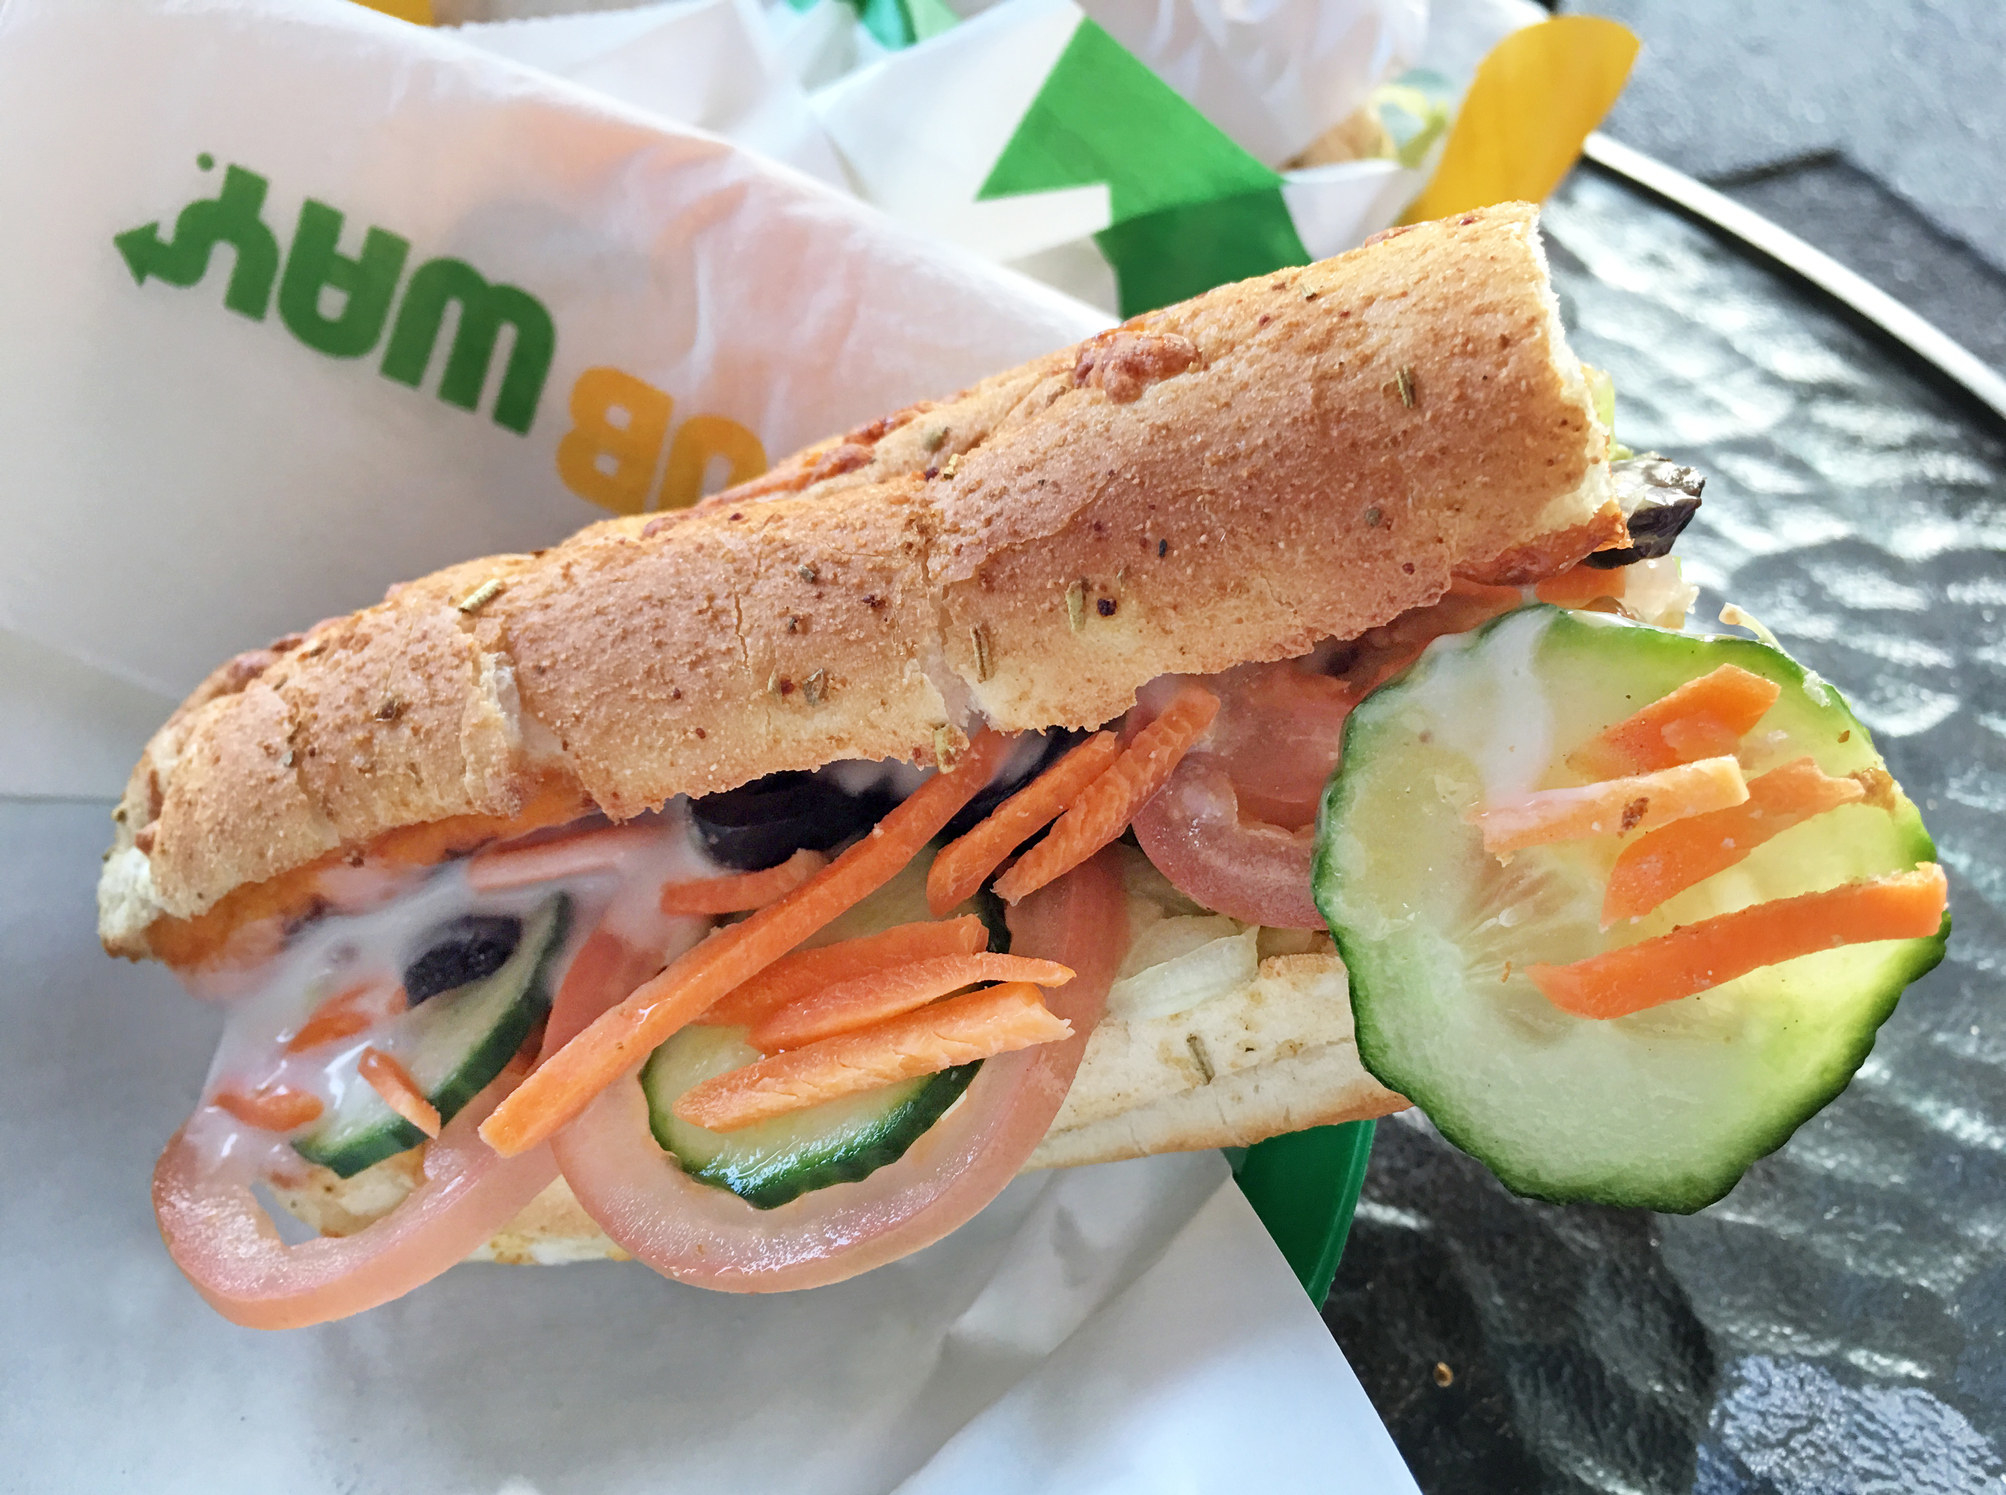 A vegetable sandwich from Subway.